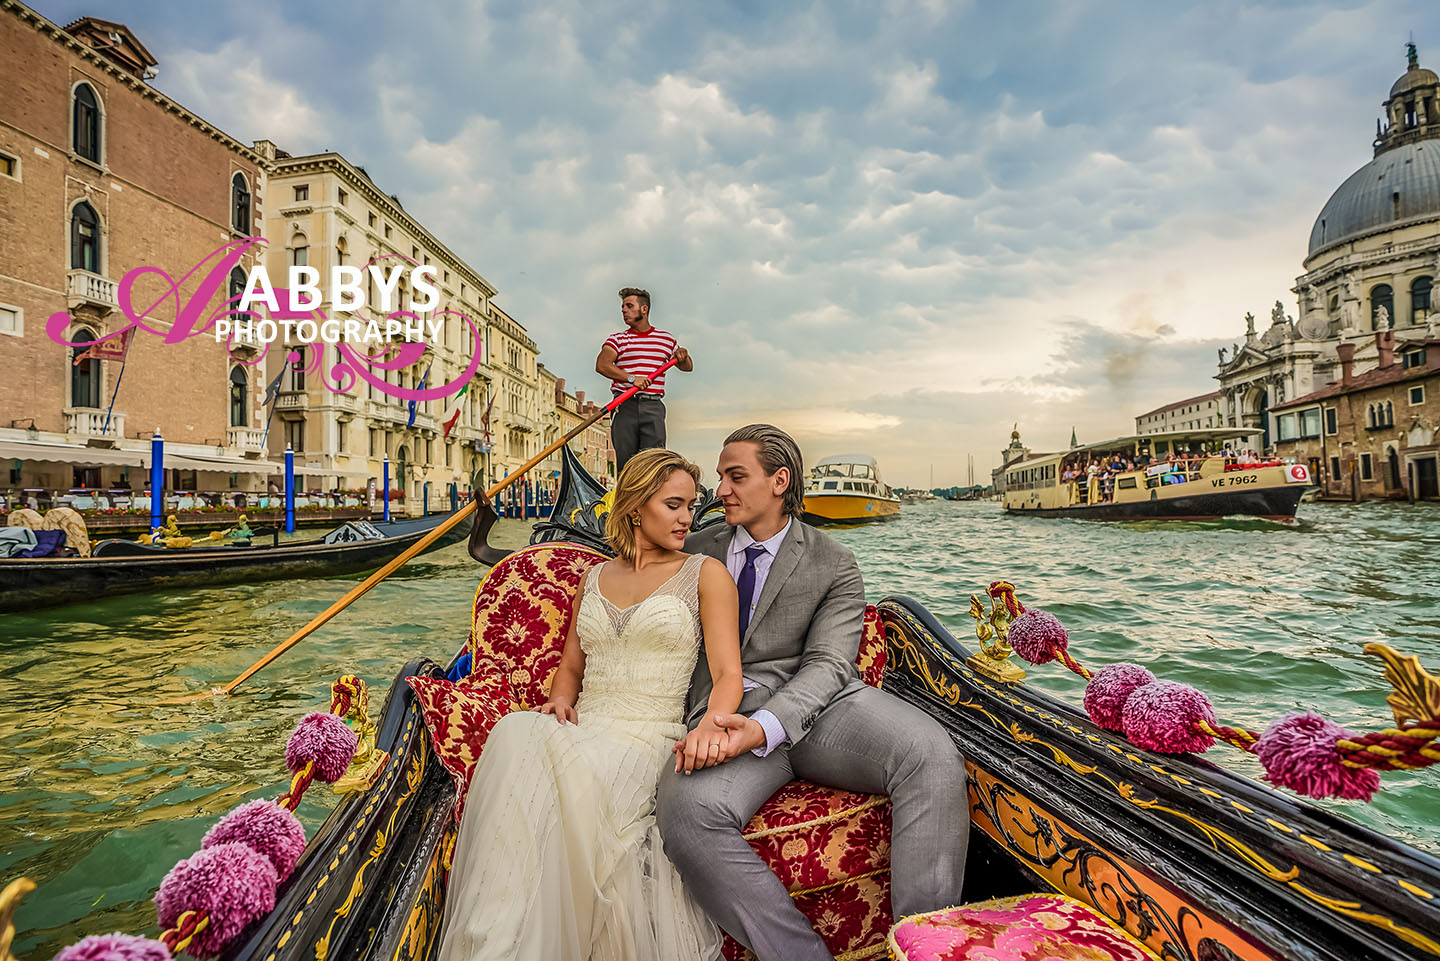 Abbys Photography can make you feel like your wedding or engagement is in Venice instead of San Fernando Valley. Call 661-342-4945  